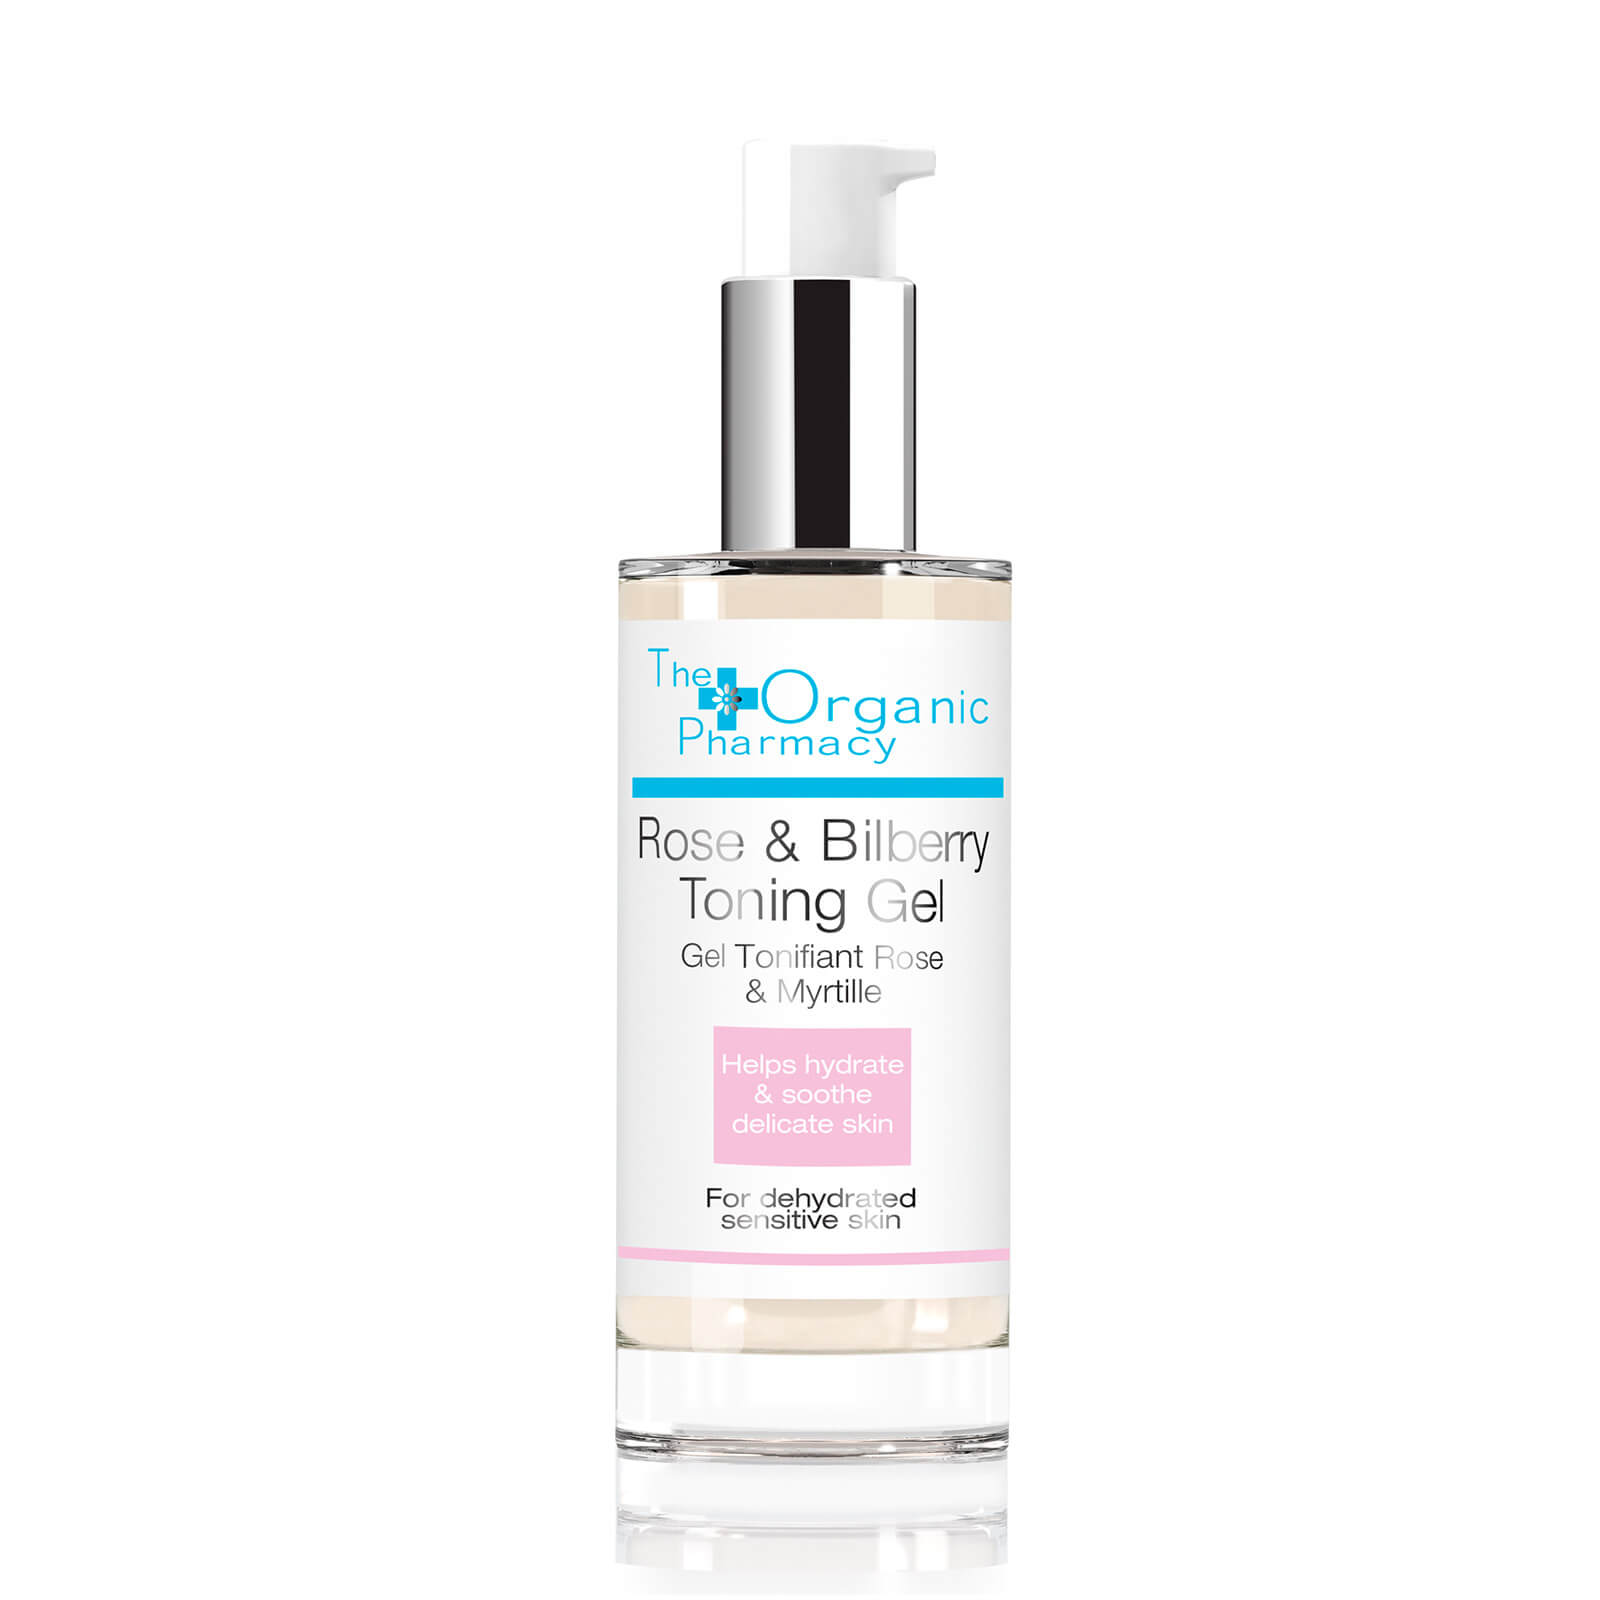 Photos - Facial / Body Cleansing Product The Organic Pharmacy Rose & Bilberry Toning Gel 50ml OPCP6 